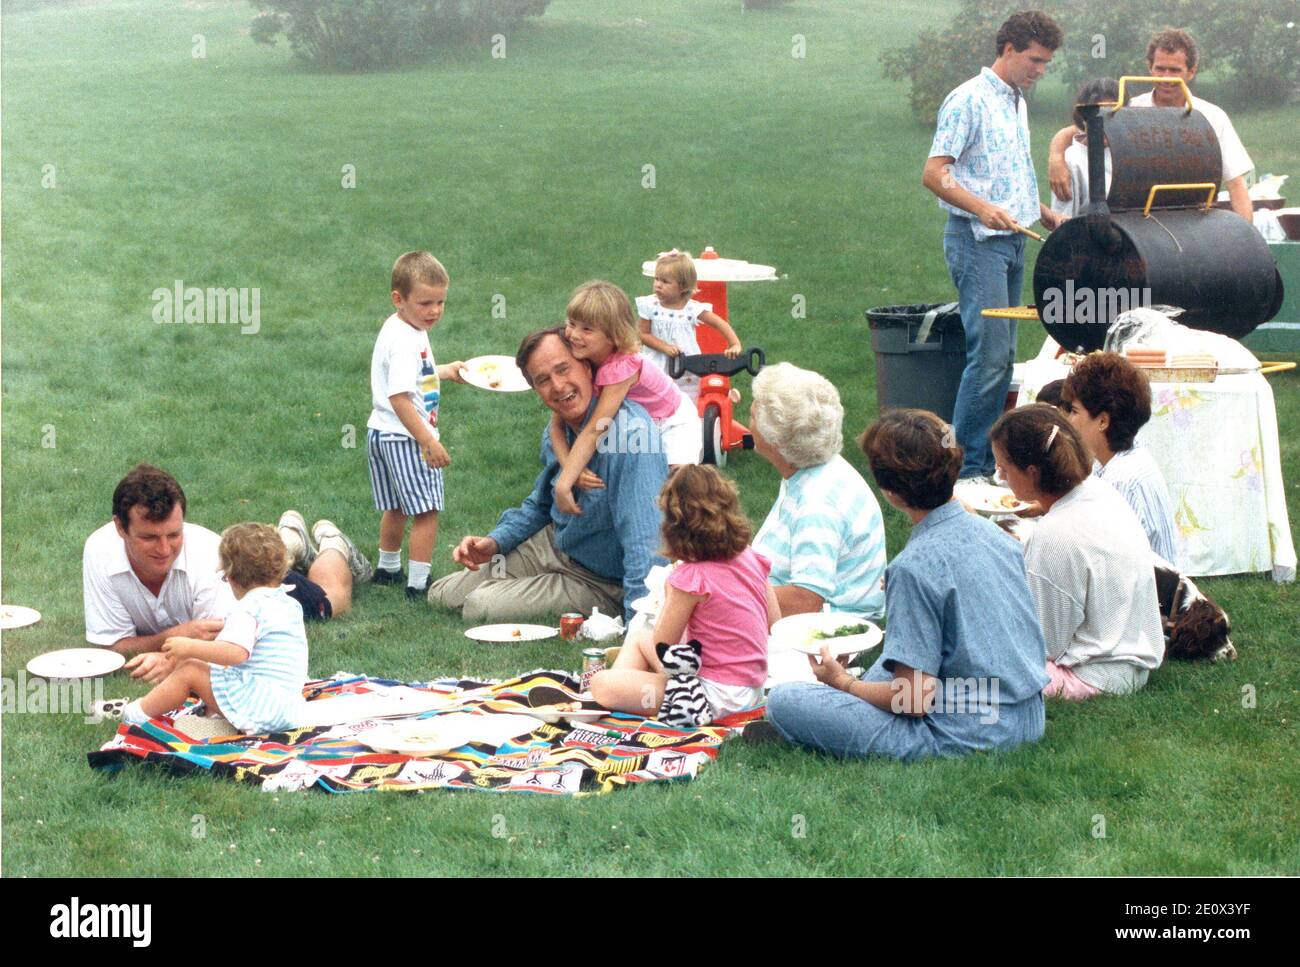 Kennebunkport, Maine - August 7, 1988 -- United States Vice President George H.W. Bush is surrounded by his children and grandchildren at the family home in Kennebunkport, Maine on August 7, 1988. Future United States President George W. Bush is at the upper right corner of the photo. Photo by White House/ CNP/ABACAPRESS.COM Stock Photo